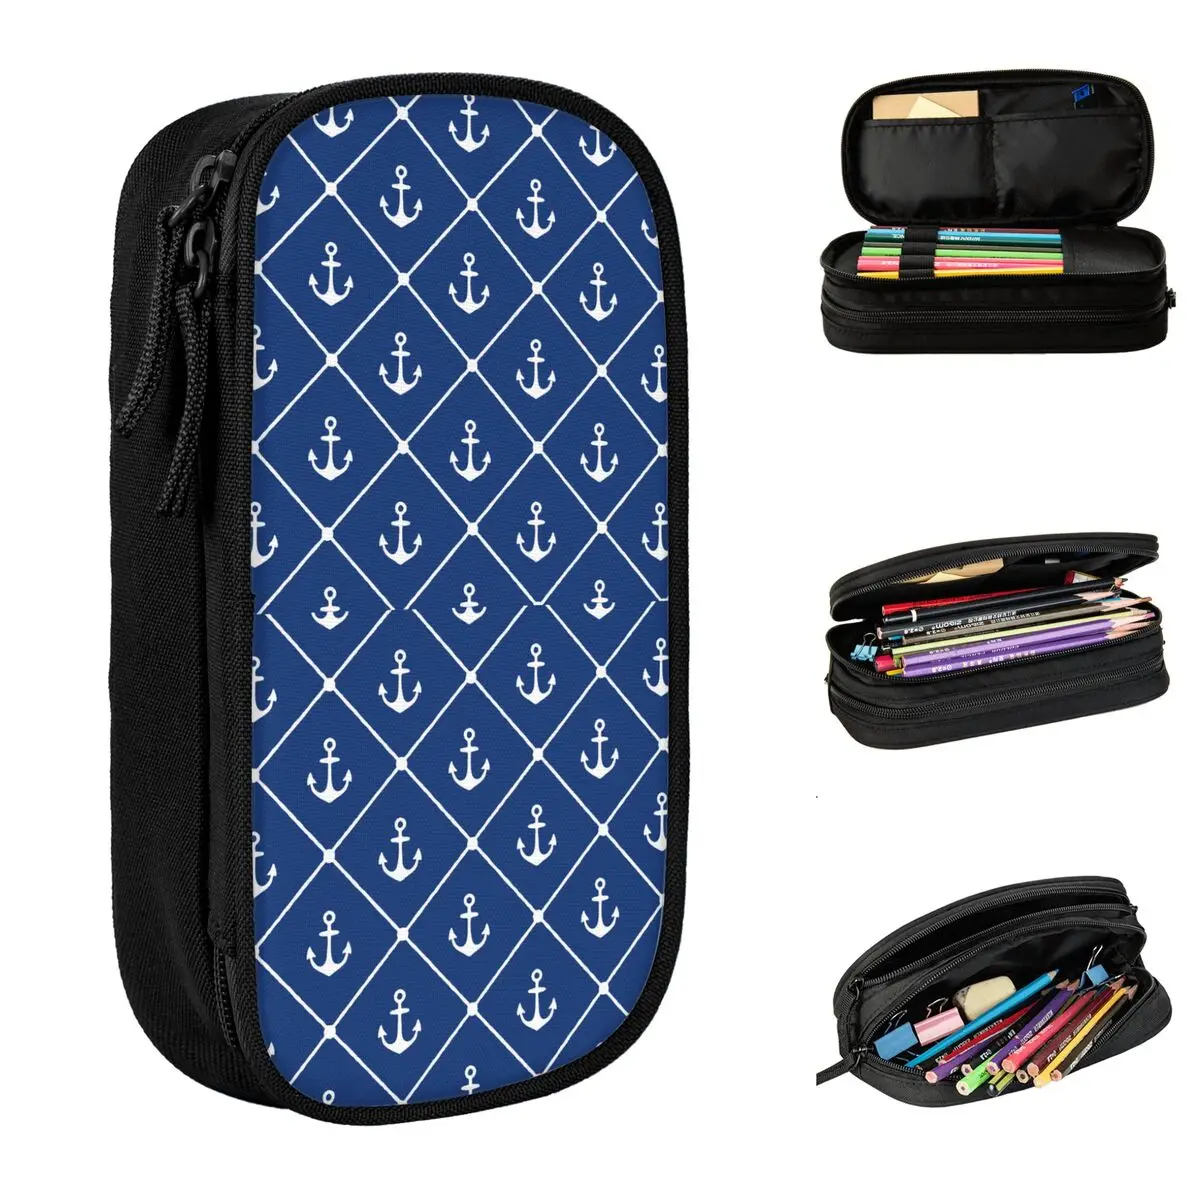 

Blue Nautical Rope Anchor Pattern Pencil Cases Pencilcases Pen Box for Student Big Pencil Bags School Supplies Gift Stationery